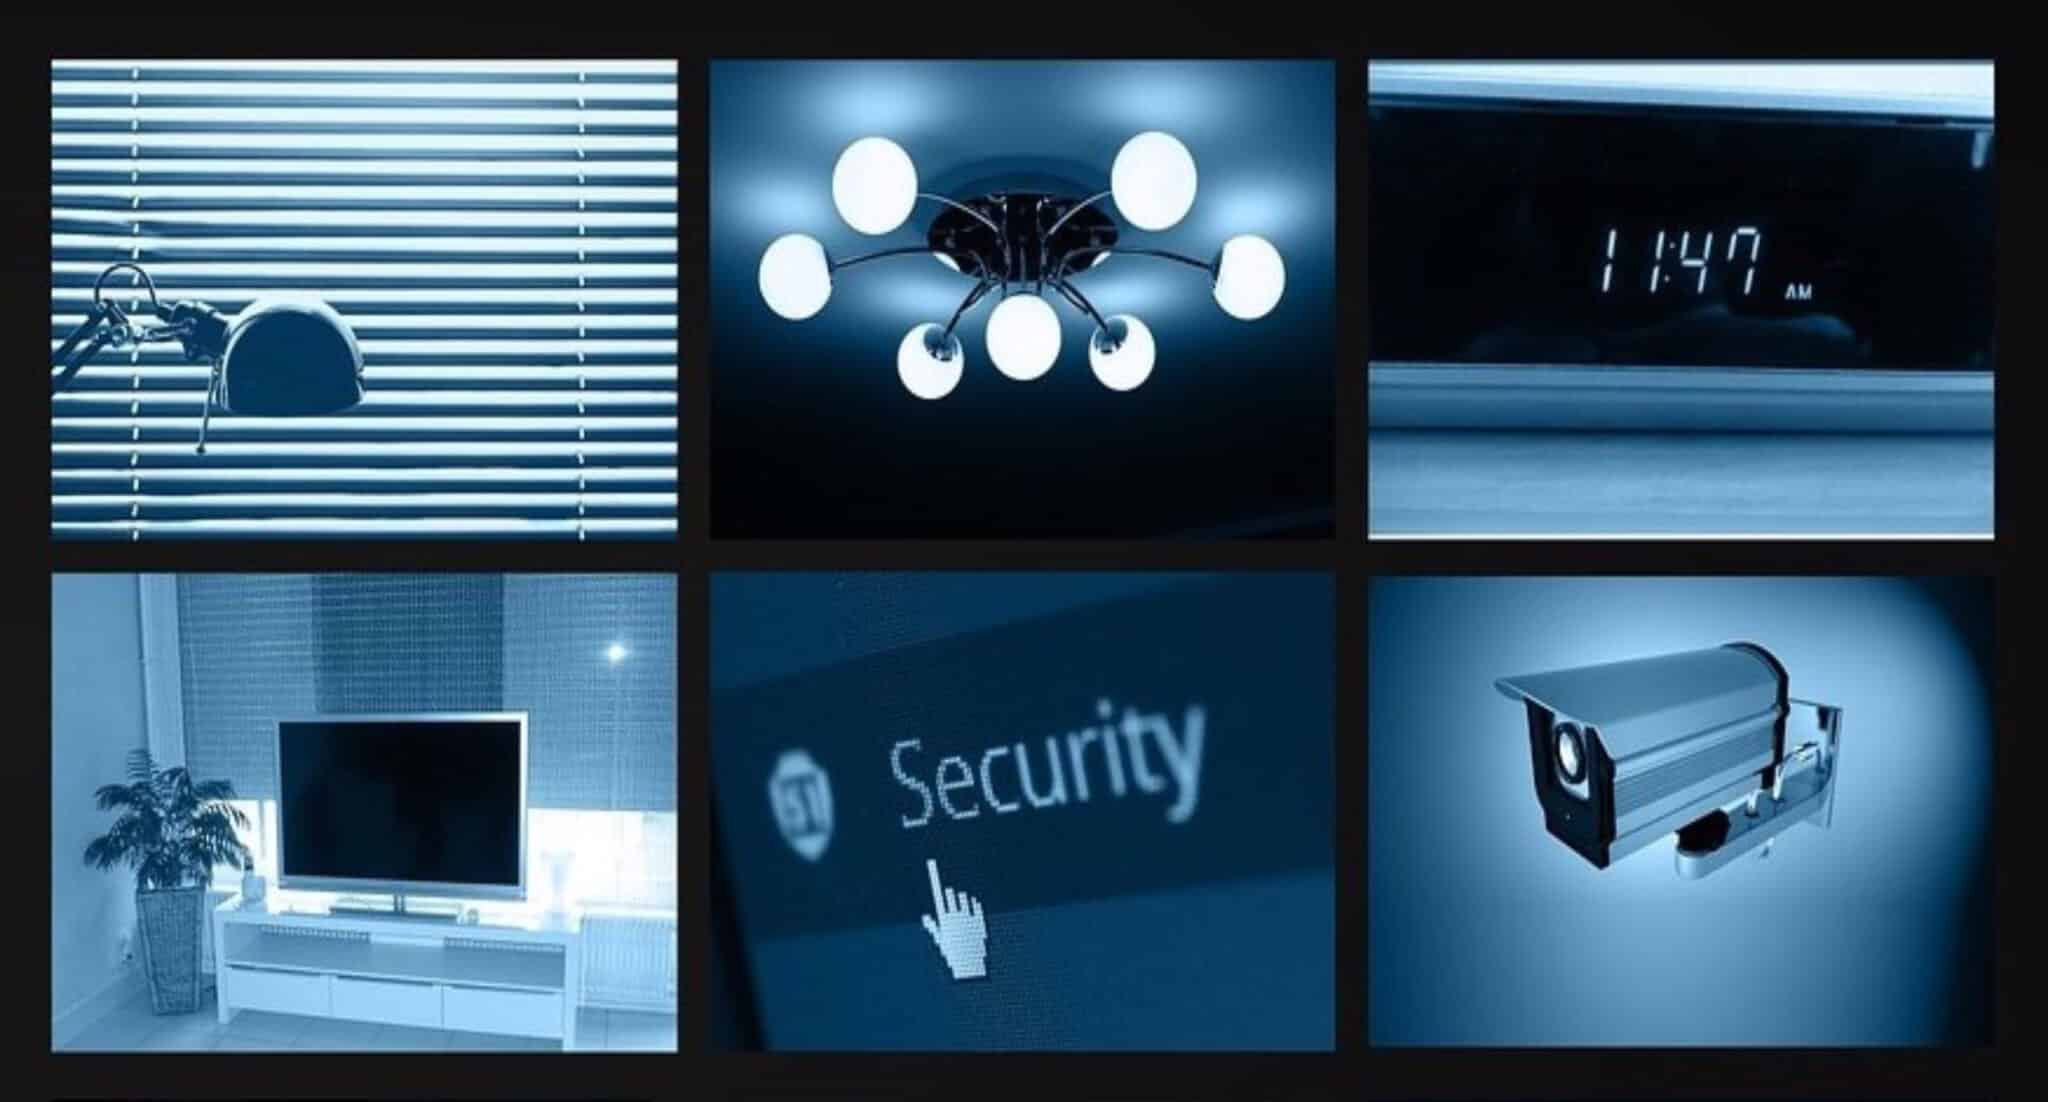 Collage of different images relating to home automation. This includes a security camera, automated lights, and more.